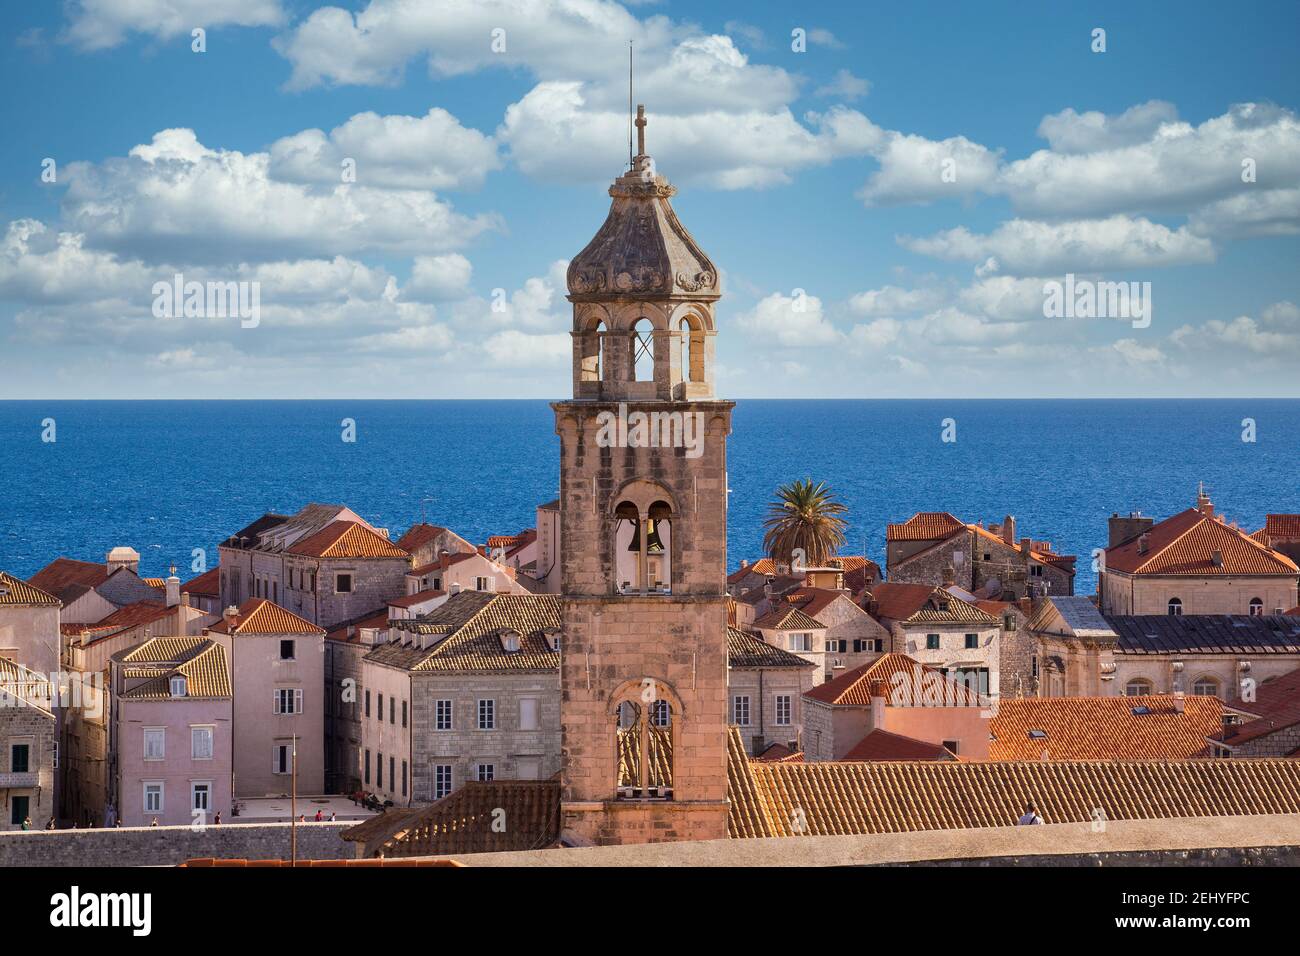 Church Tower with a Bell Overlooking the City of Dubrovnik,  Blue Sea with blue skies and white clouds Stock Photo